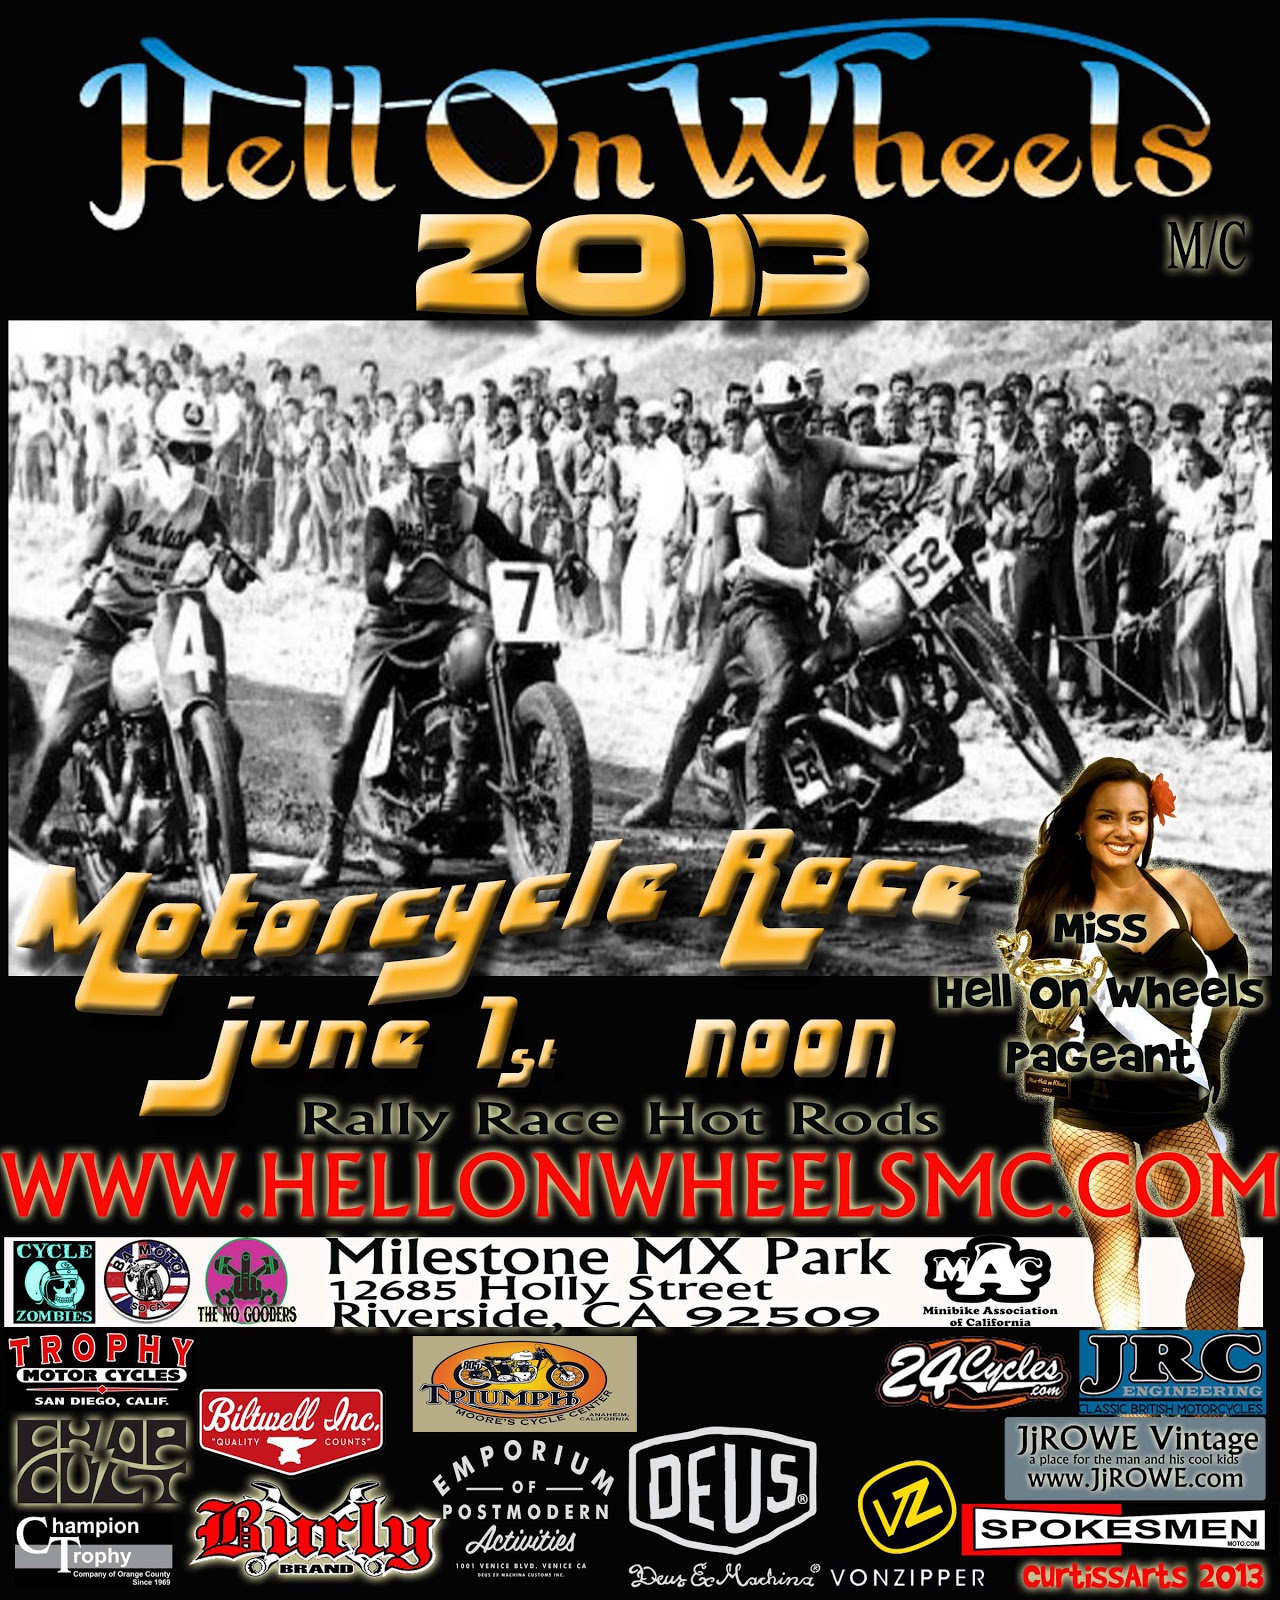 Nostalgia on Wheels: Hell on Wheels 2013 Motorcycle Race & Miss Hell on ...